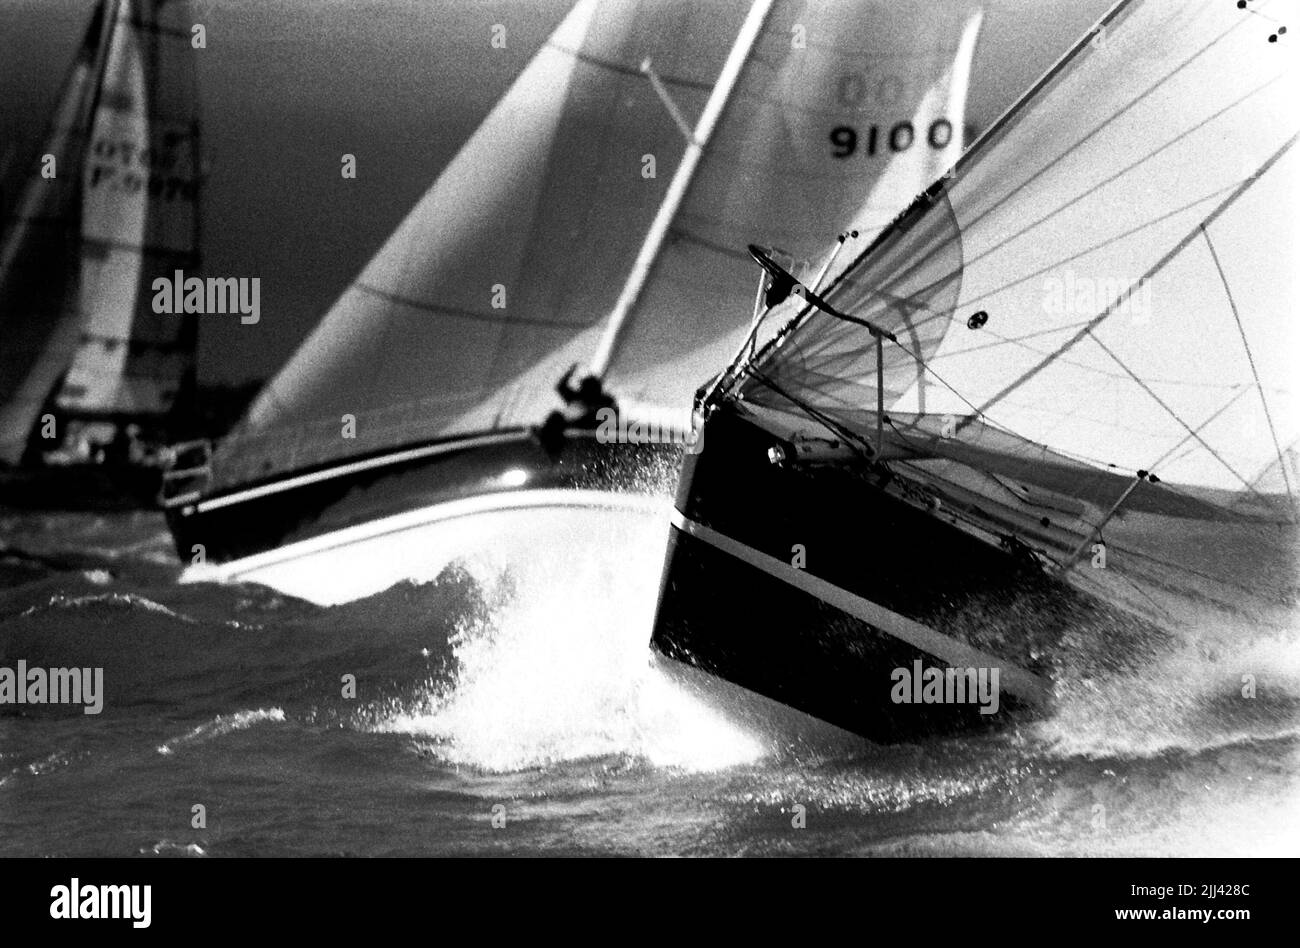 AJAXNETPHOTO. 1985. SOLENT, ENGLAND. - ADMIRAL'S CUP - MARIONETTE (SINGAPORE) AT START OF FASTNET RACE IN LUMPY SEAS OFF EGYPT POINT. PHOTO:JONATHAN EASTLAND/AJAX. REF: 340 222904 23 Stock Photo